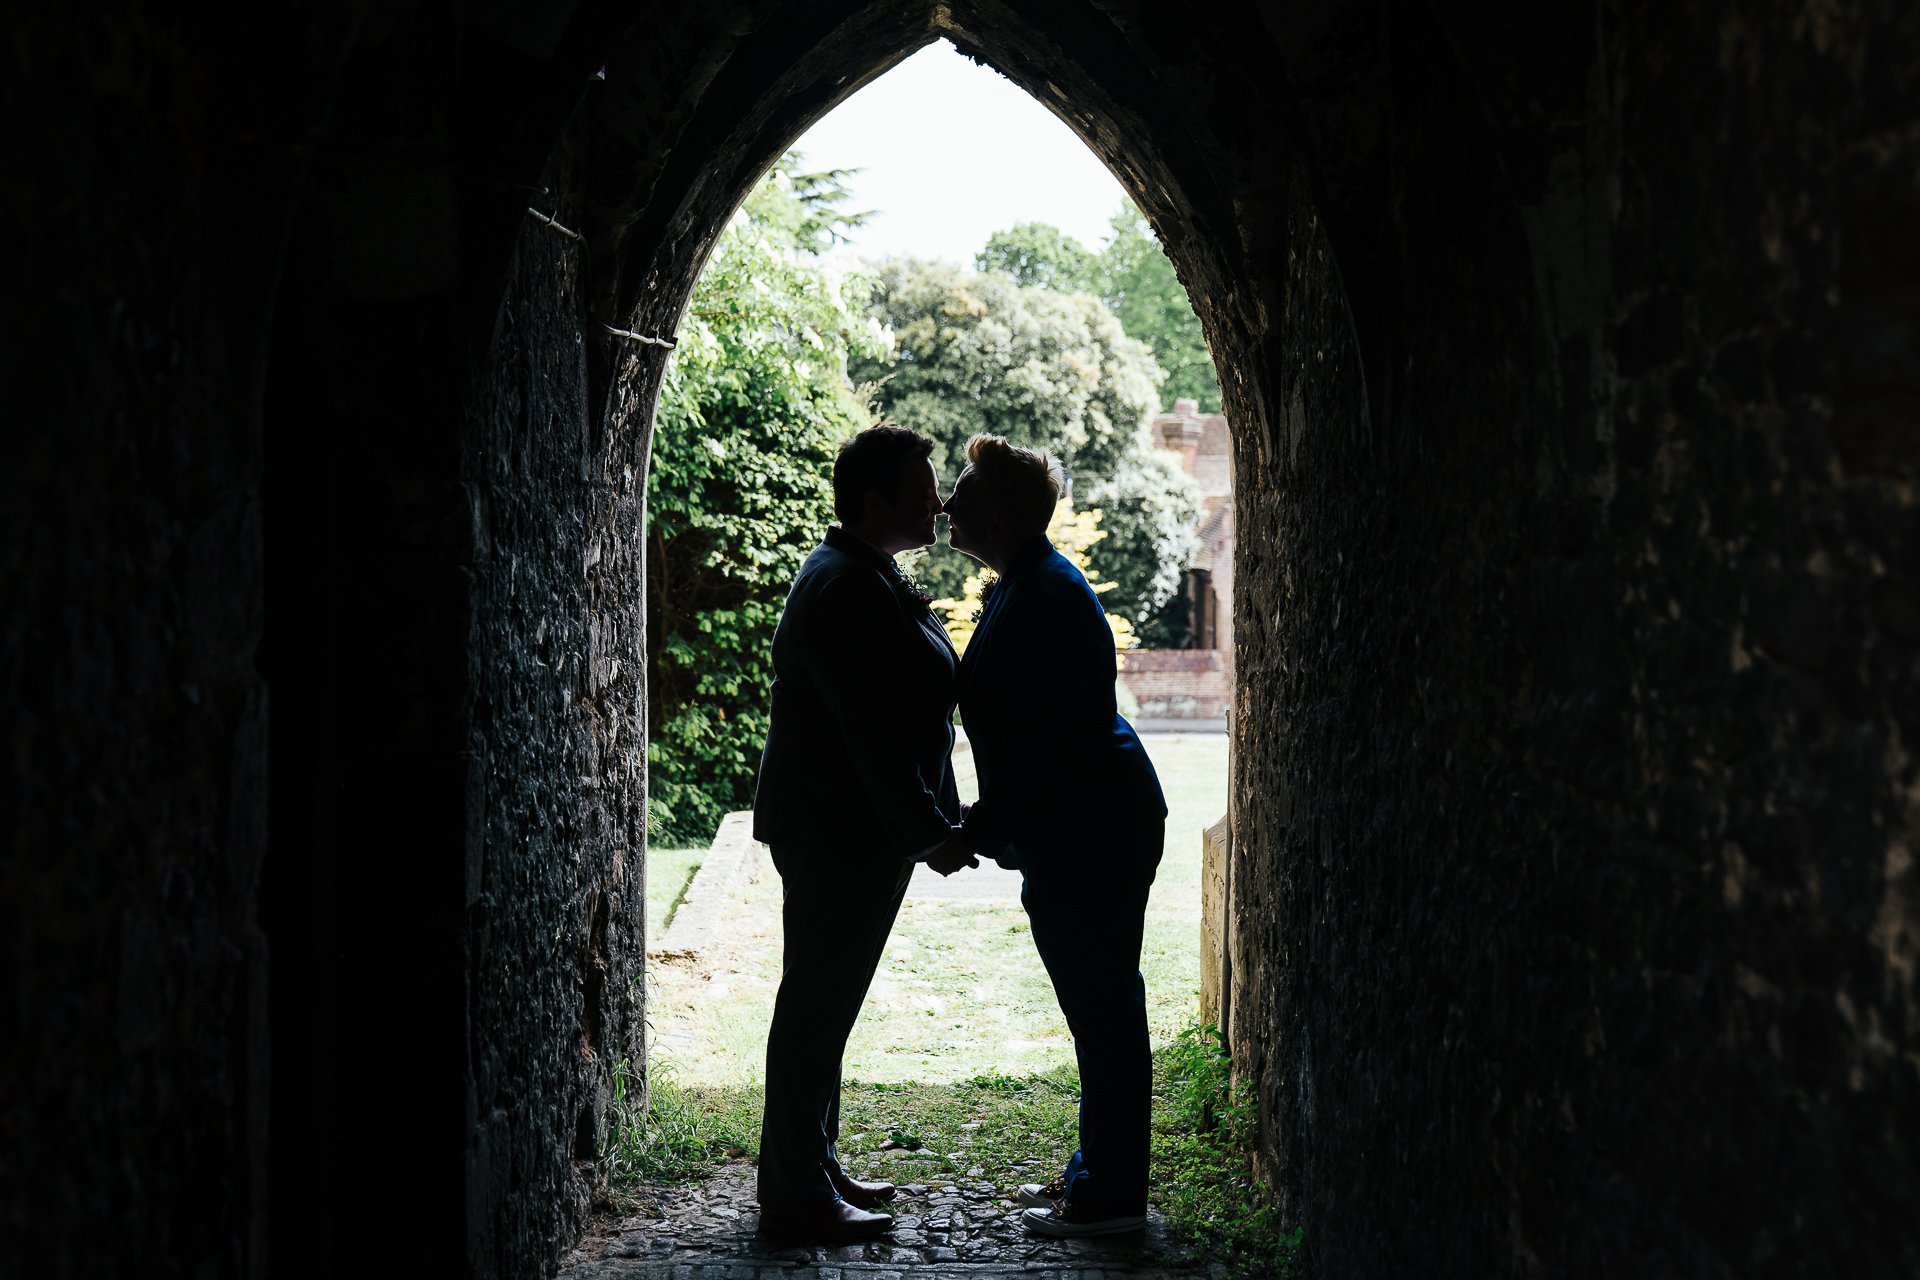 Wedding couple embrace in a tunnel after their ceremony